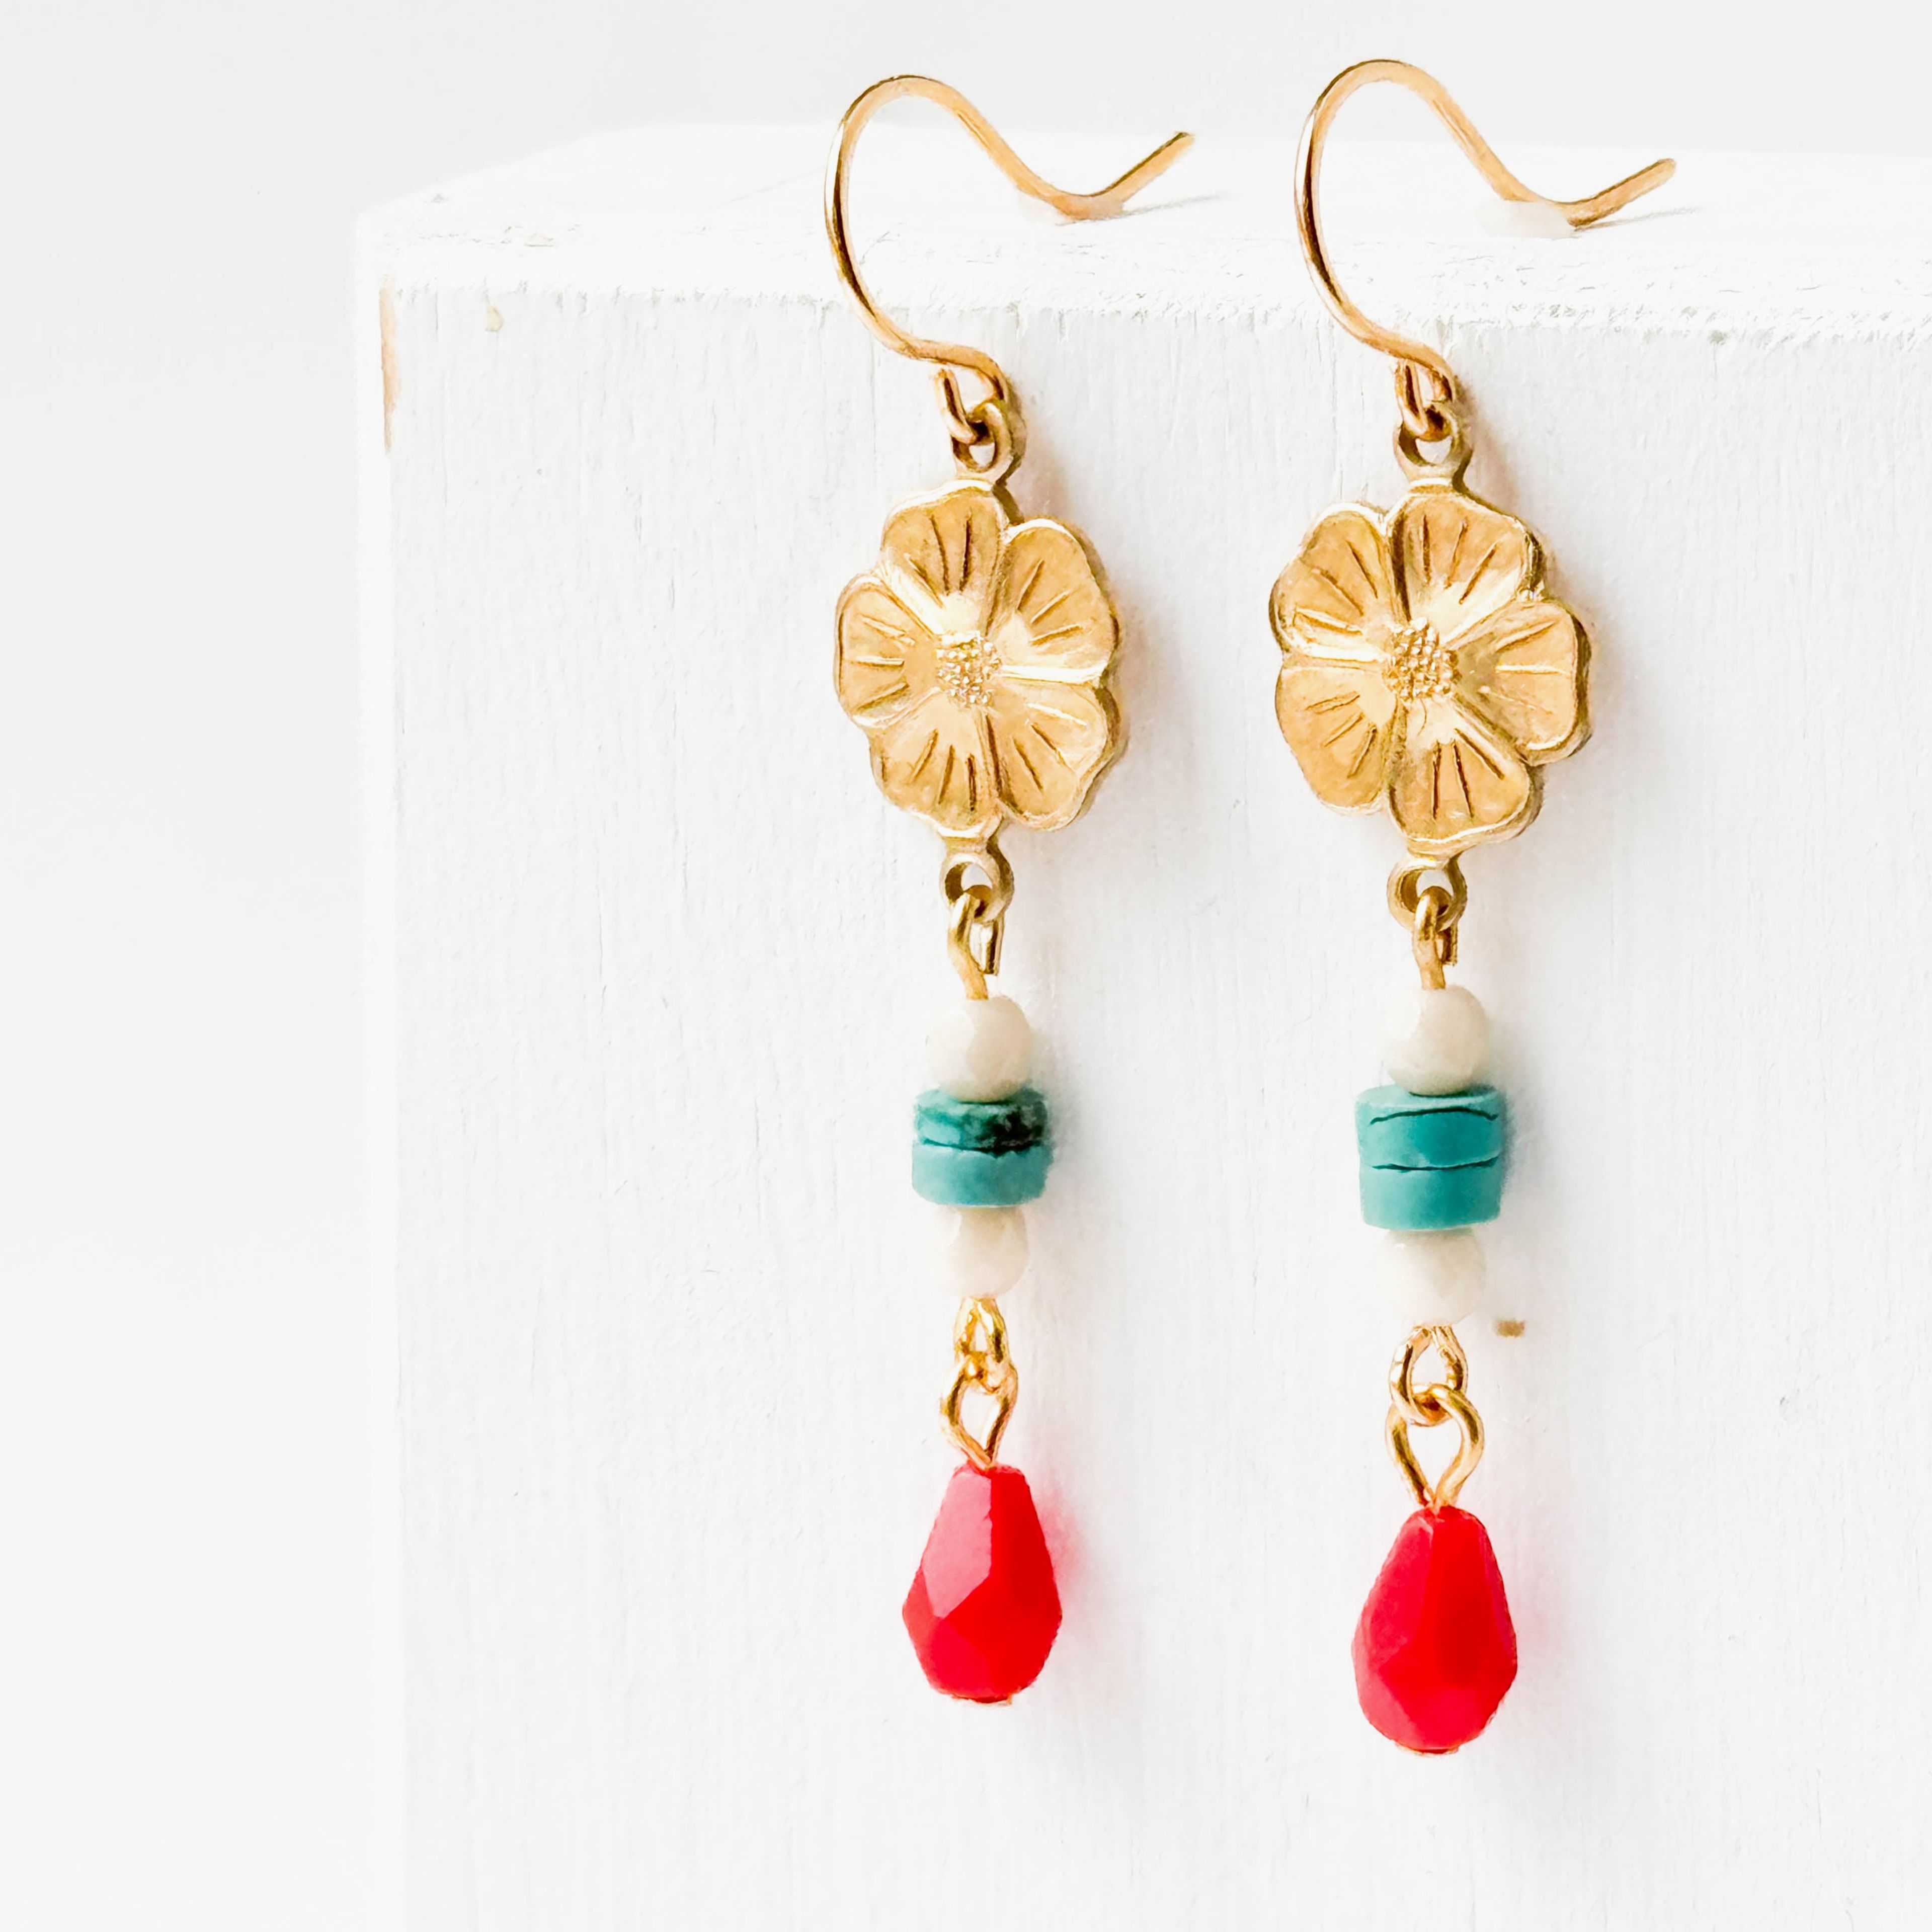 Long Flower Earrings with Turquoise Stones and Red Beads